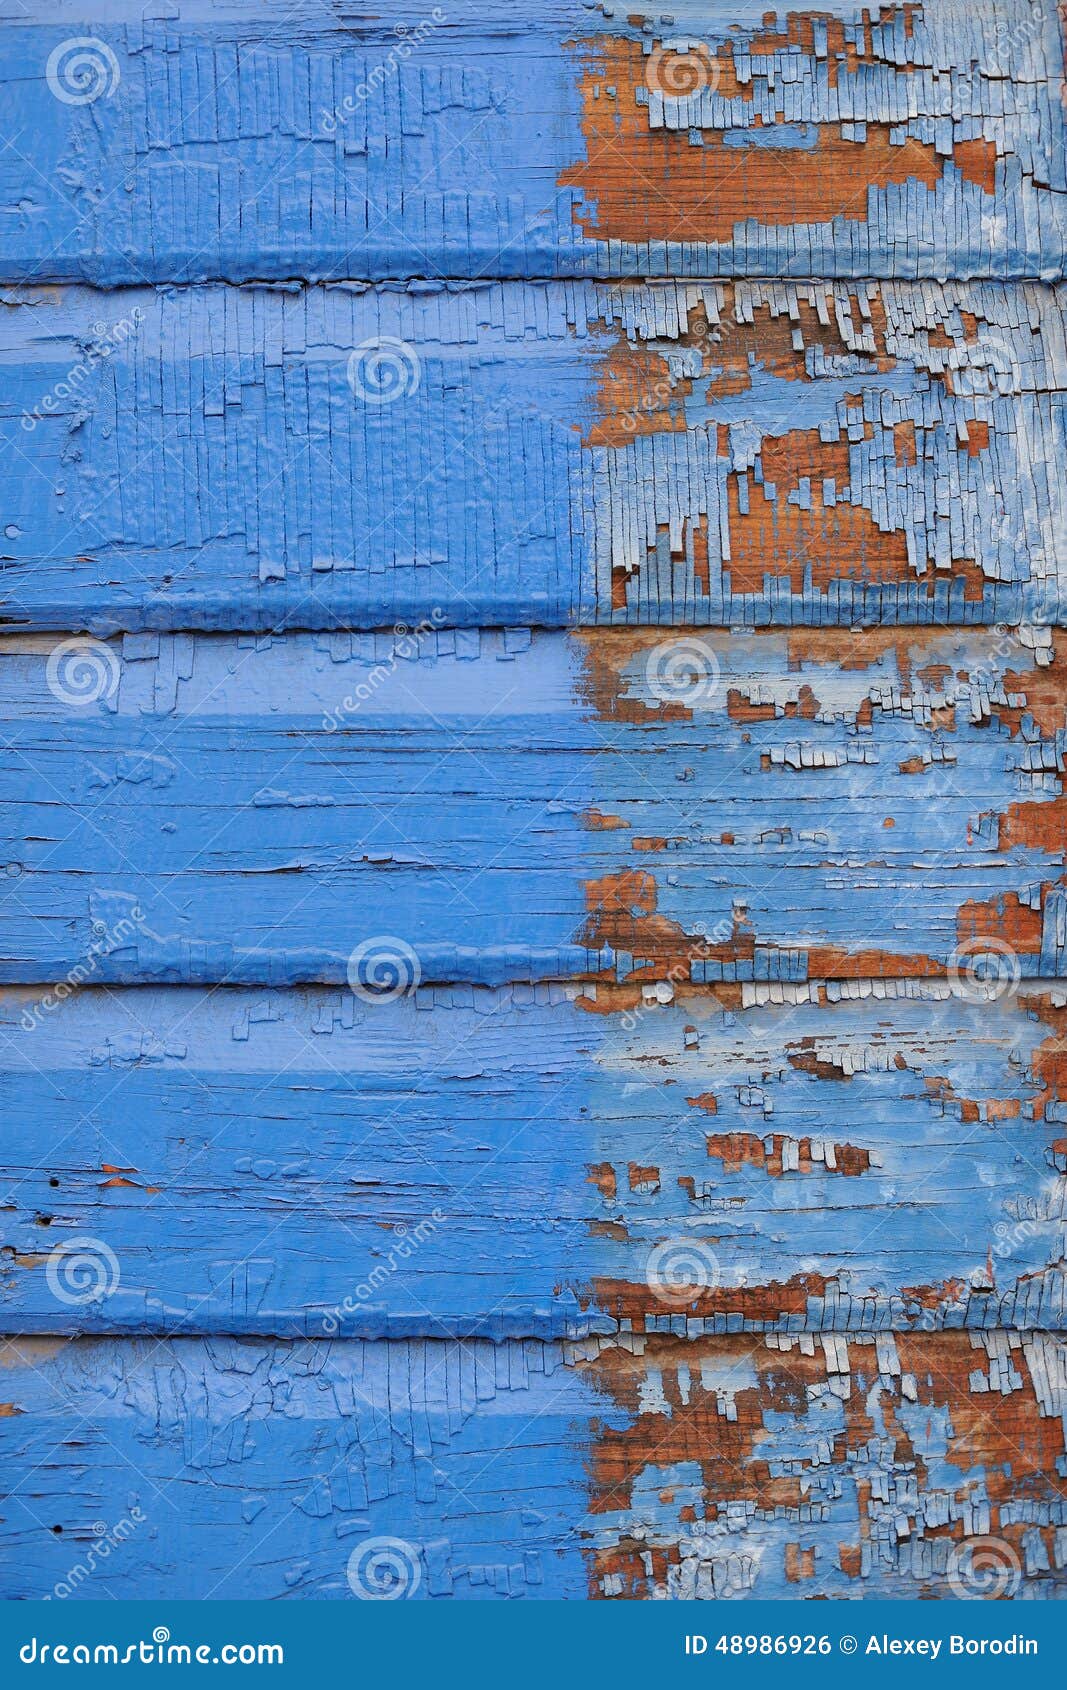 old vibrant blue painted wooden background